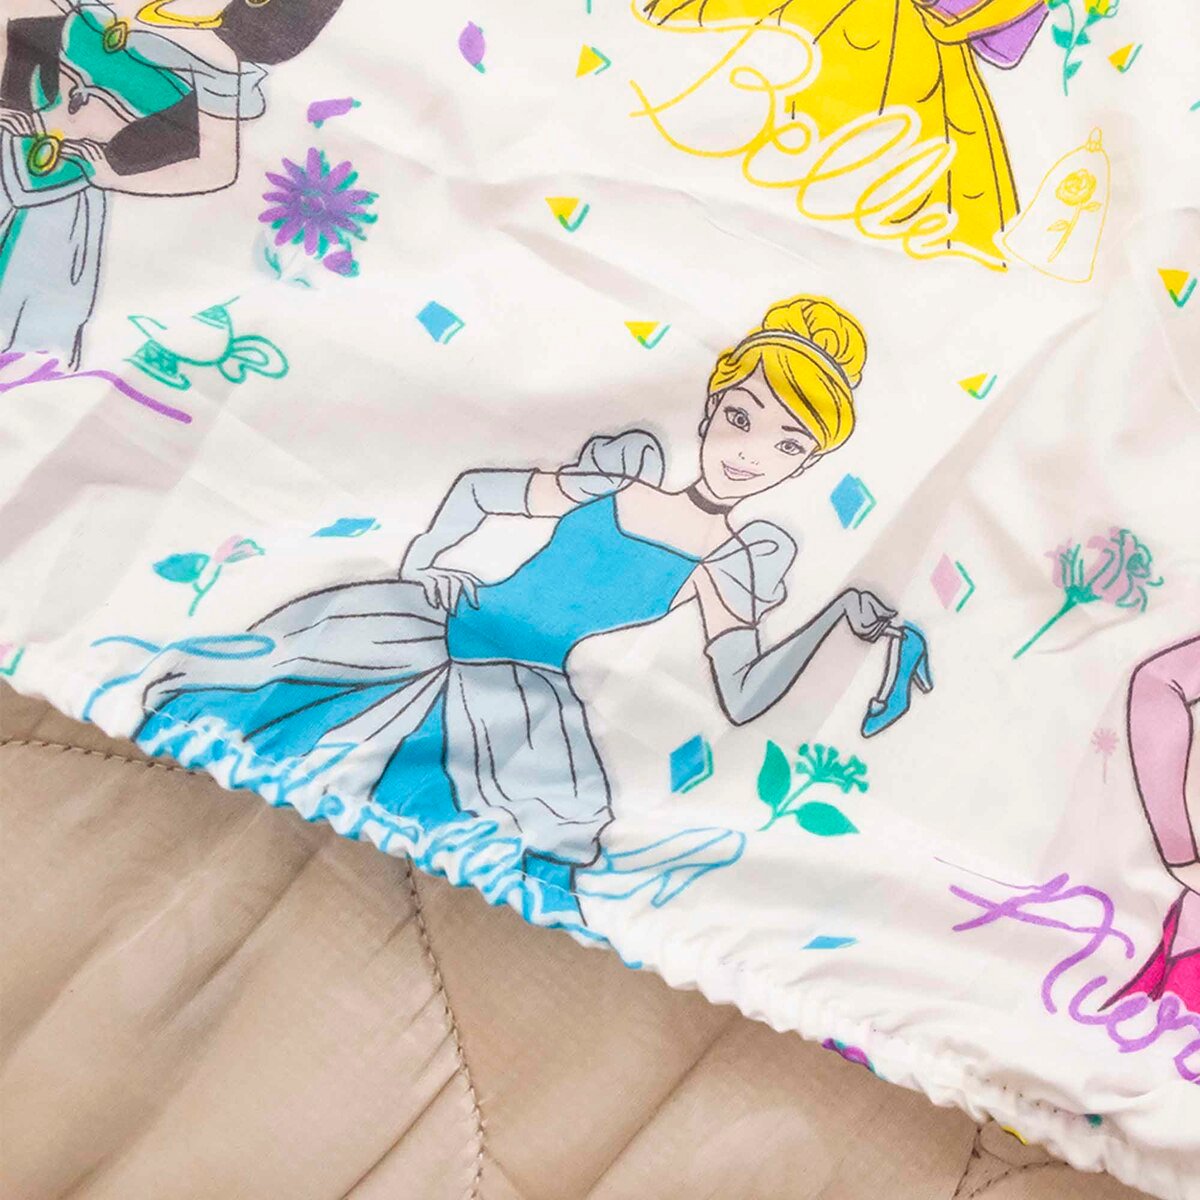 Disney Princess Fitted Bed Sheet for Kids -Super Soft, Fade Resistant (Official Disney Product) 90x190+25cm RHA5644